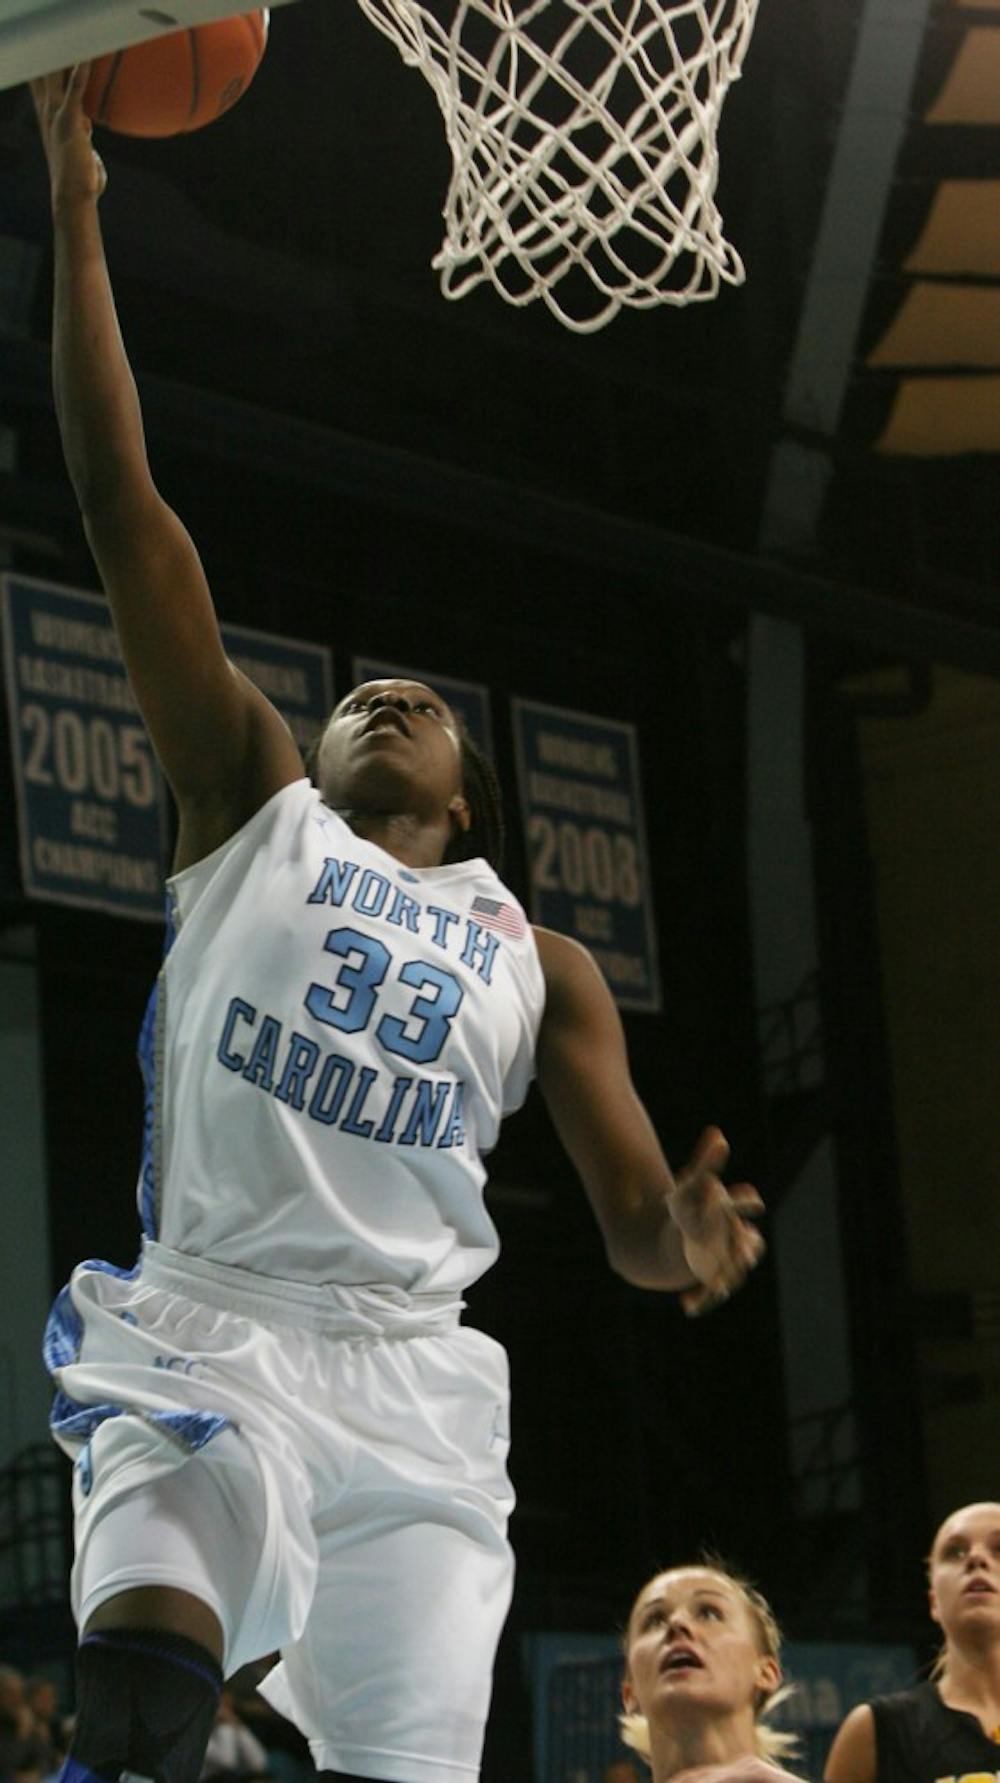 North Carolina forward Laura Broomfield goes up for a layup against Iowa. The 6-foot-1 junior scored 12 points and grabbed 11 rebounds in 20 minutes of action. It was her first double-double this year.